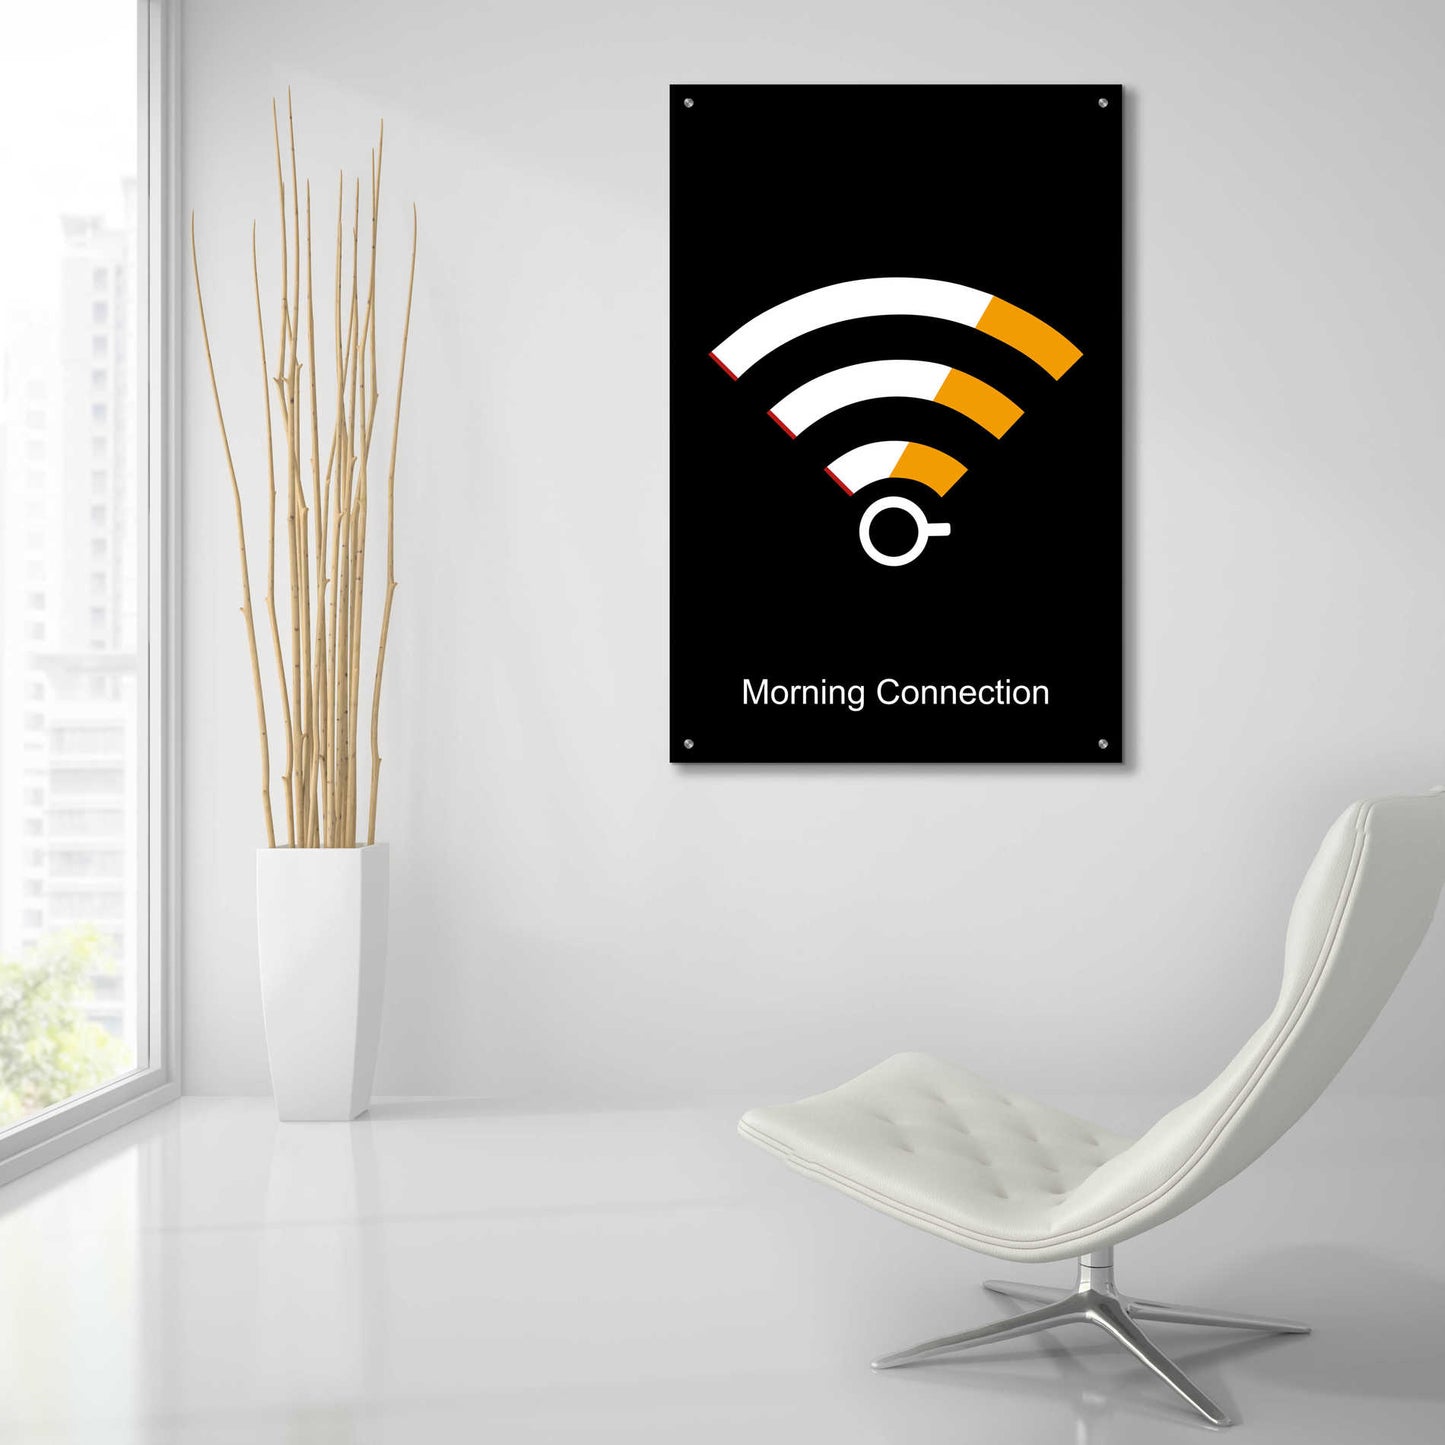 Epic Art 'Morning Connection' by Cesare Bellassai, Acrylic Glass Wall Art,24x36